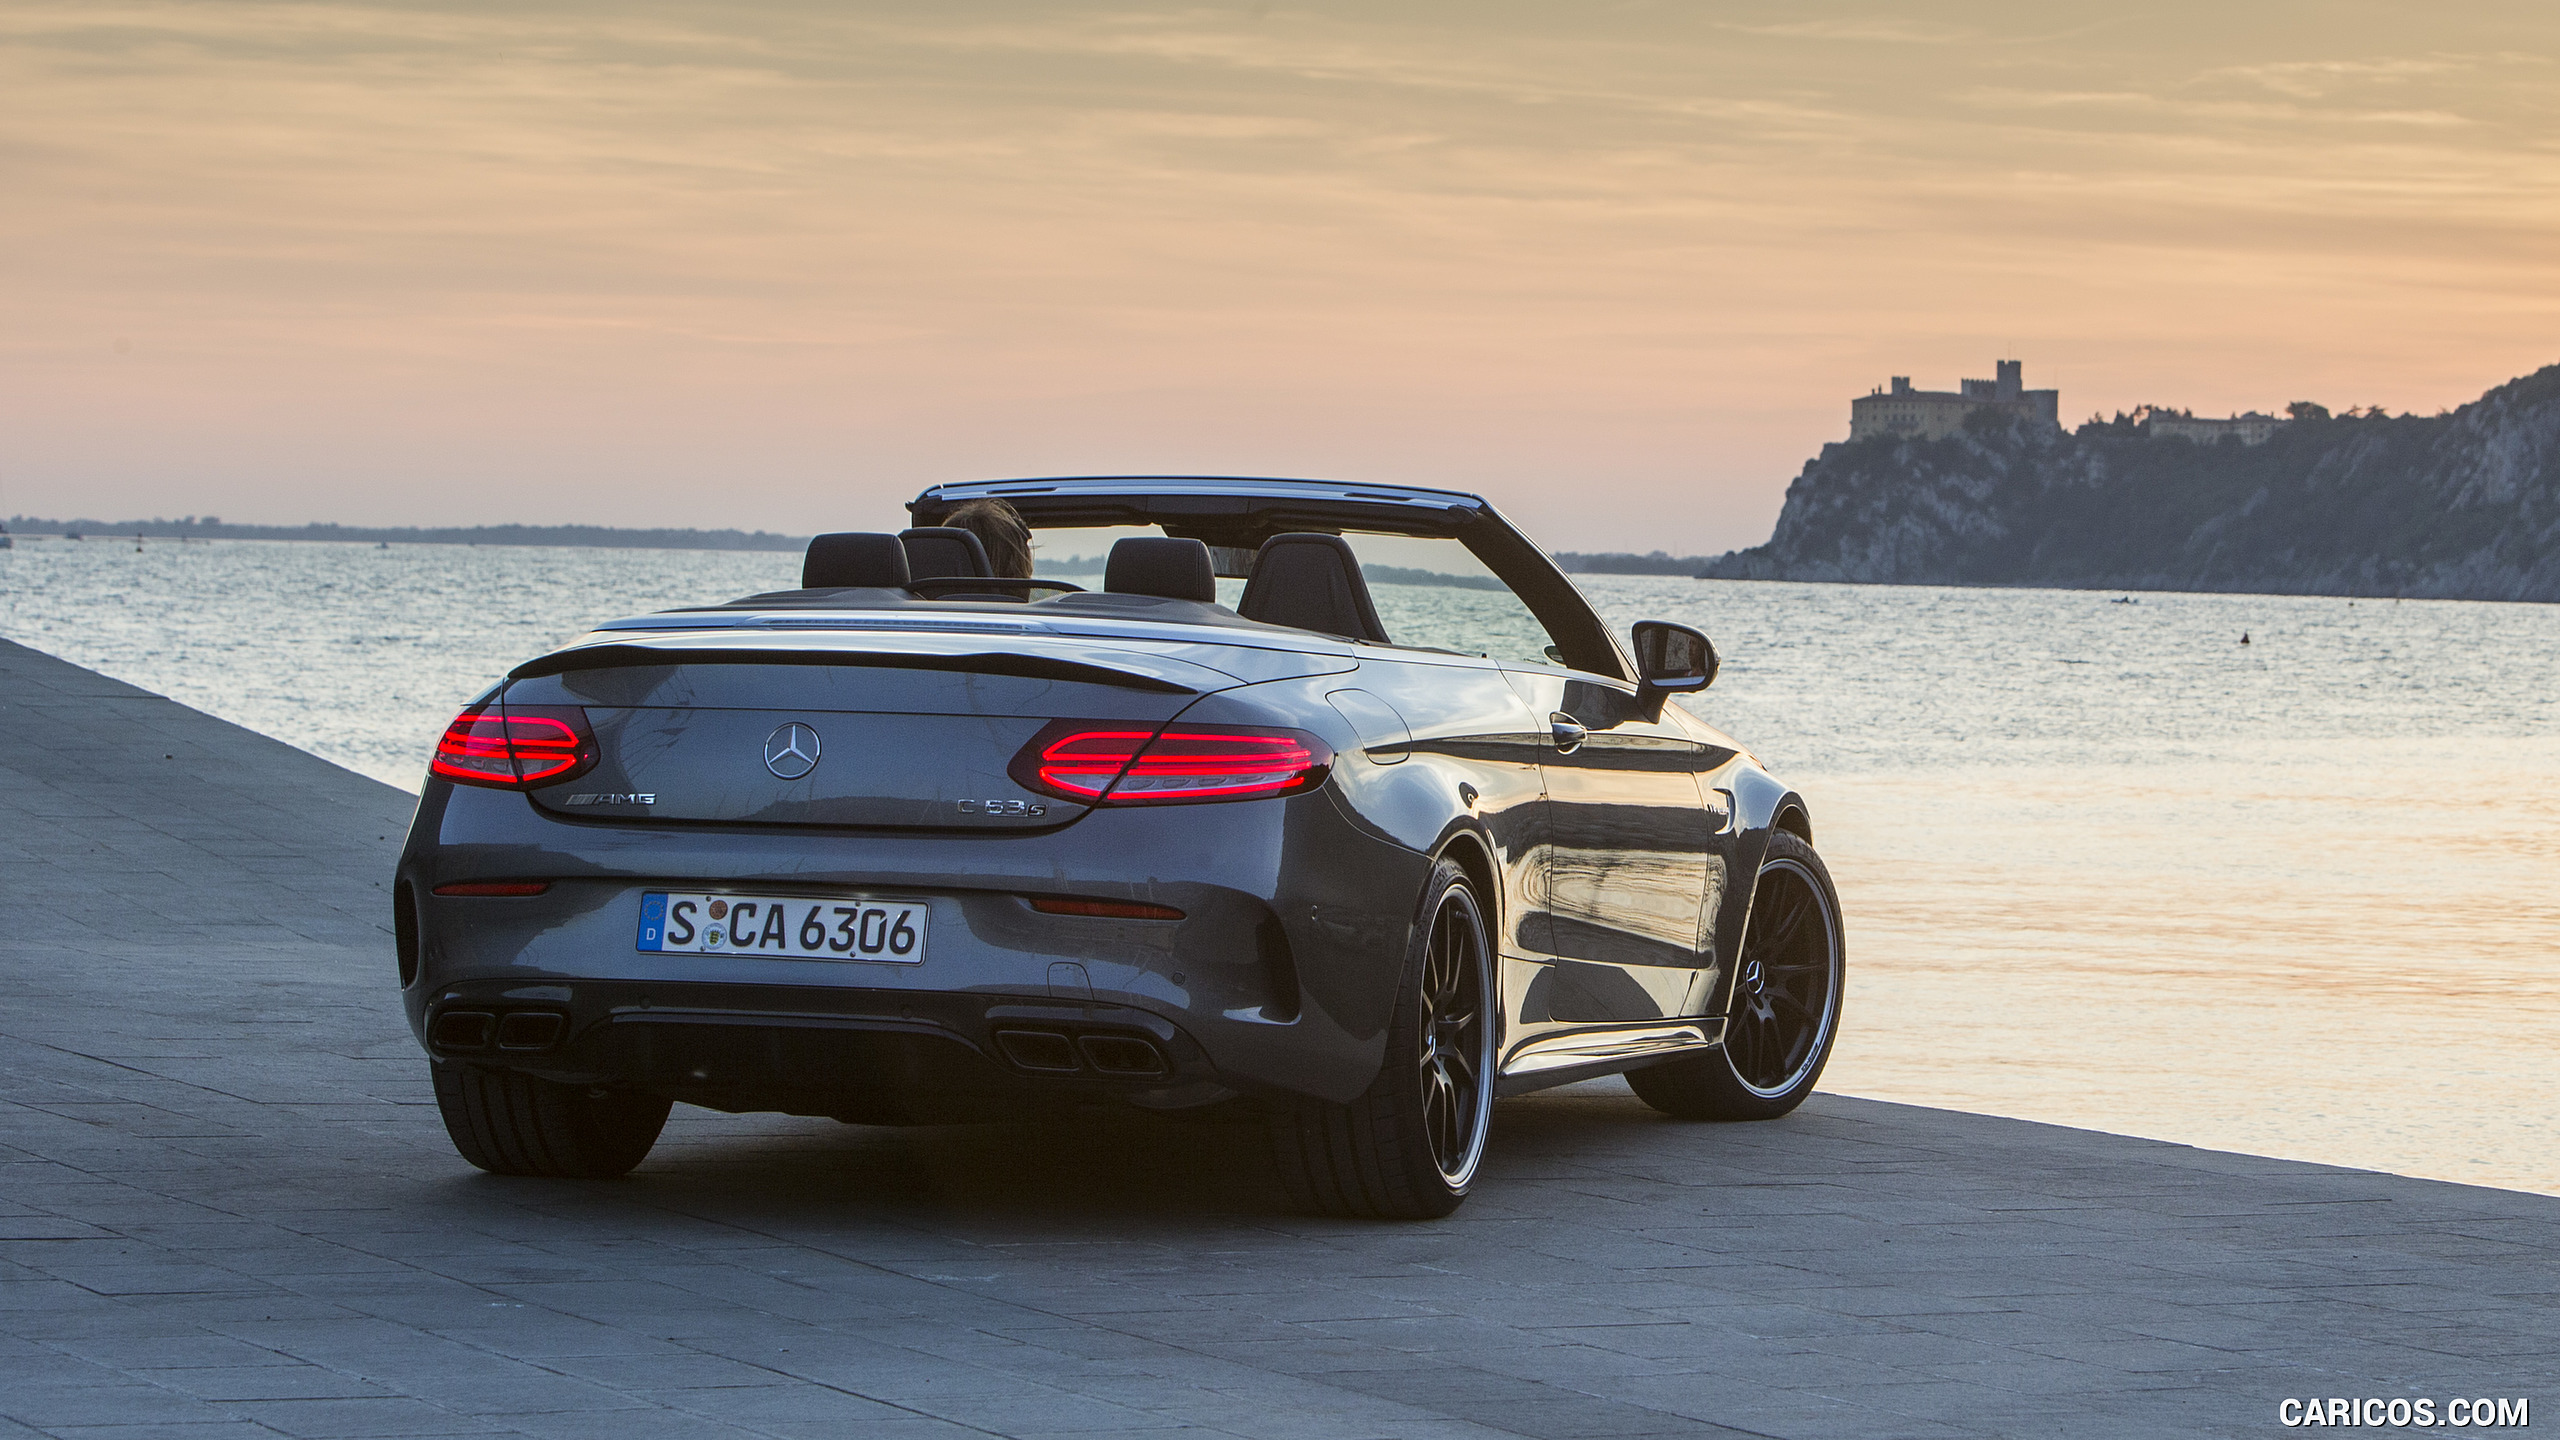 2017 Mercedes-AMG C63 S Cabriolet - Rear, #37 of 222